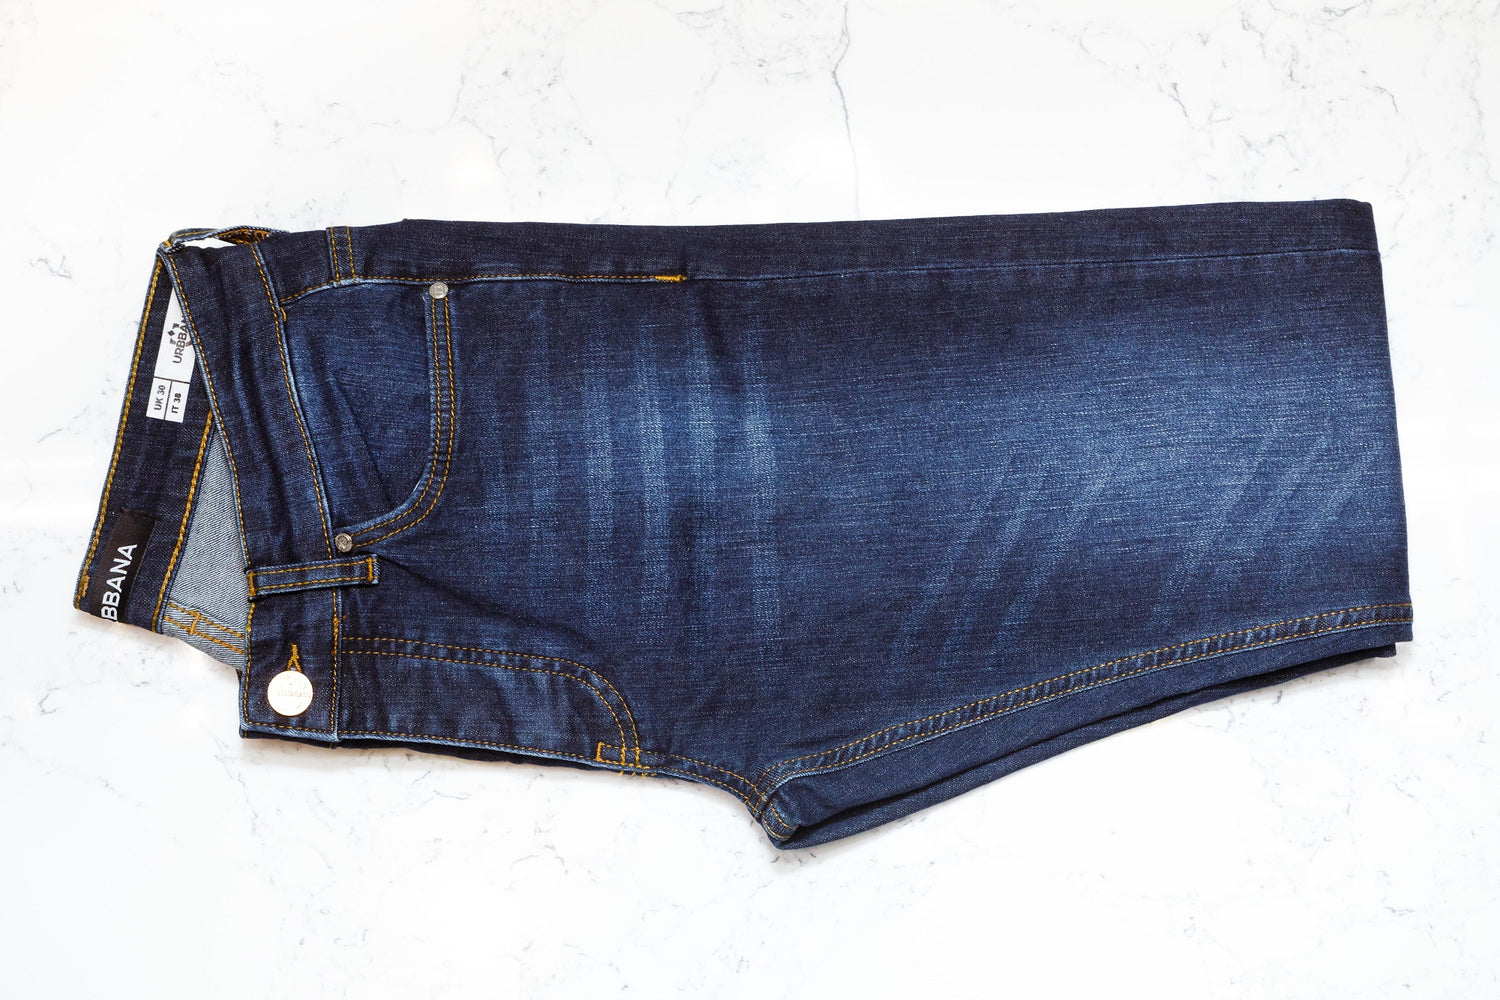 The Pablo Jeans - Jeans by Urbbana